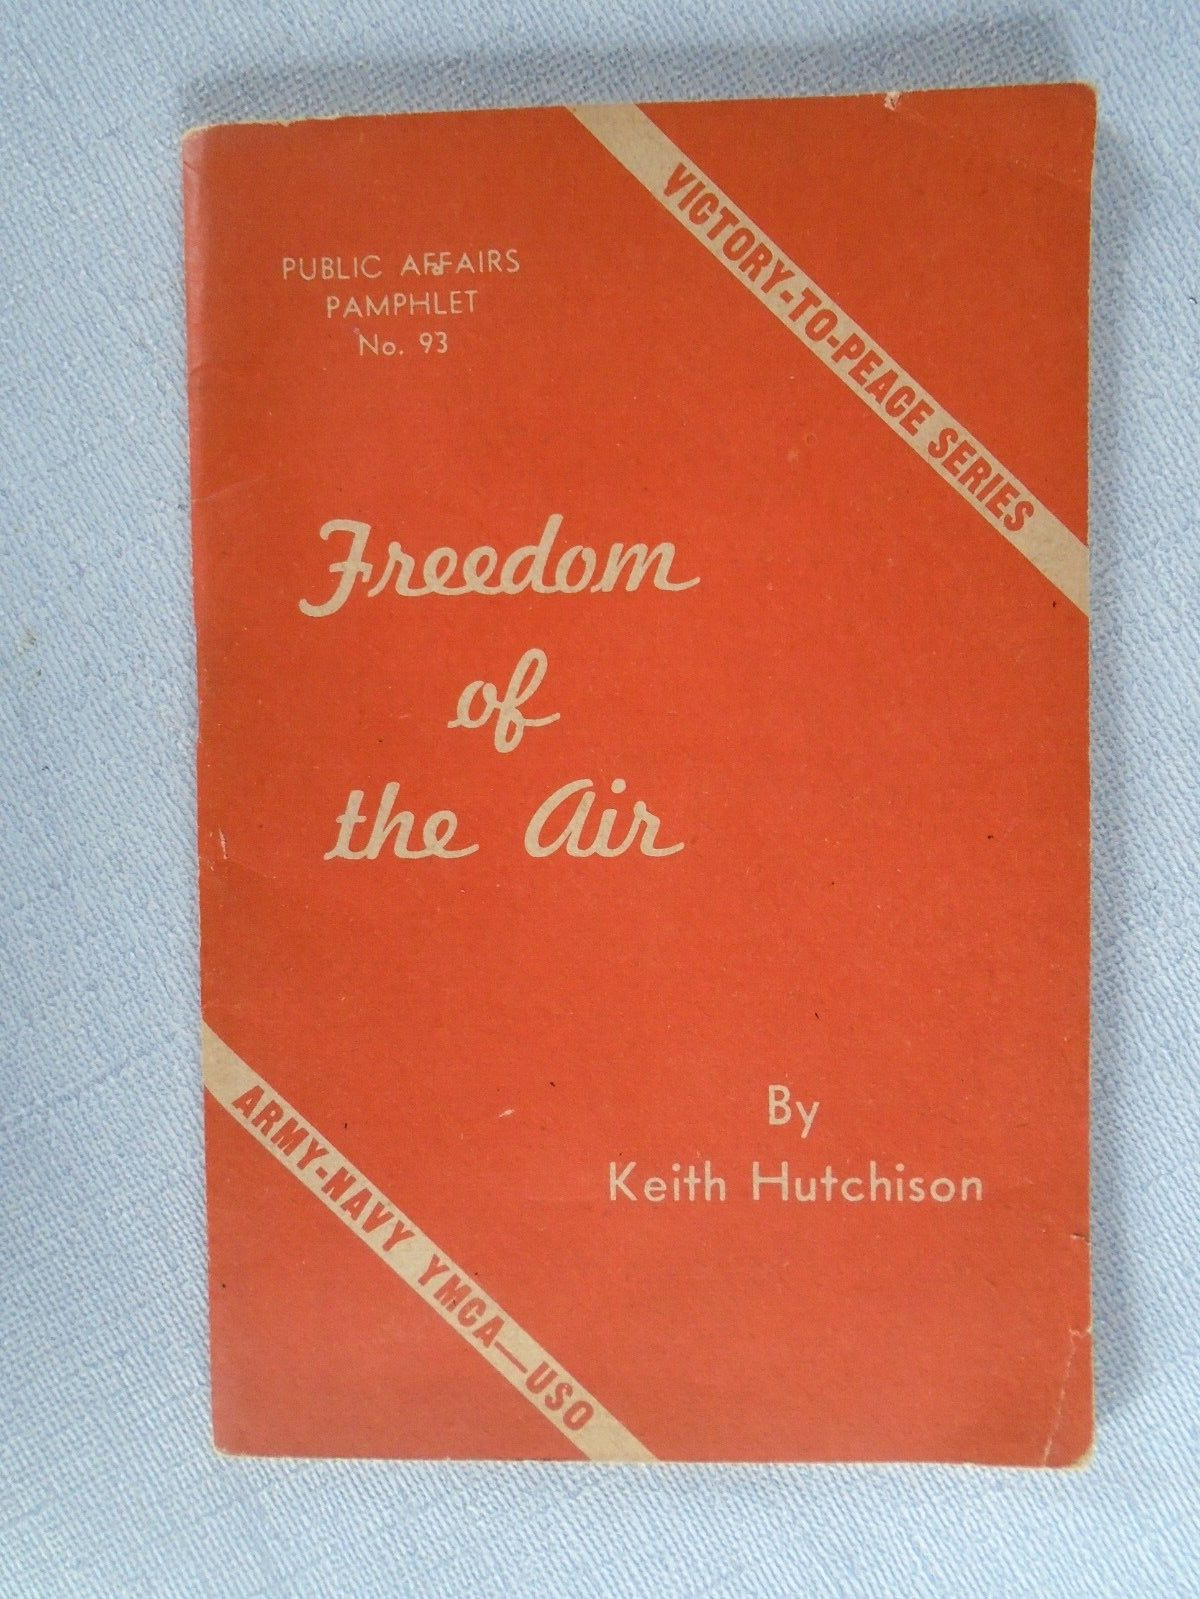 USO 1944 booklet, Freedom of The Air